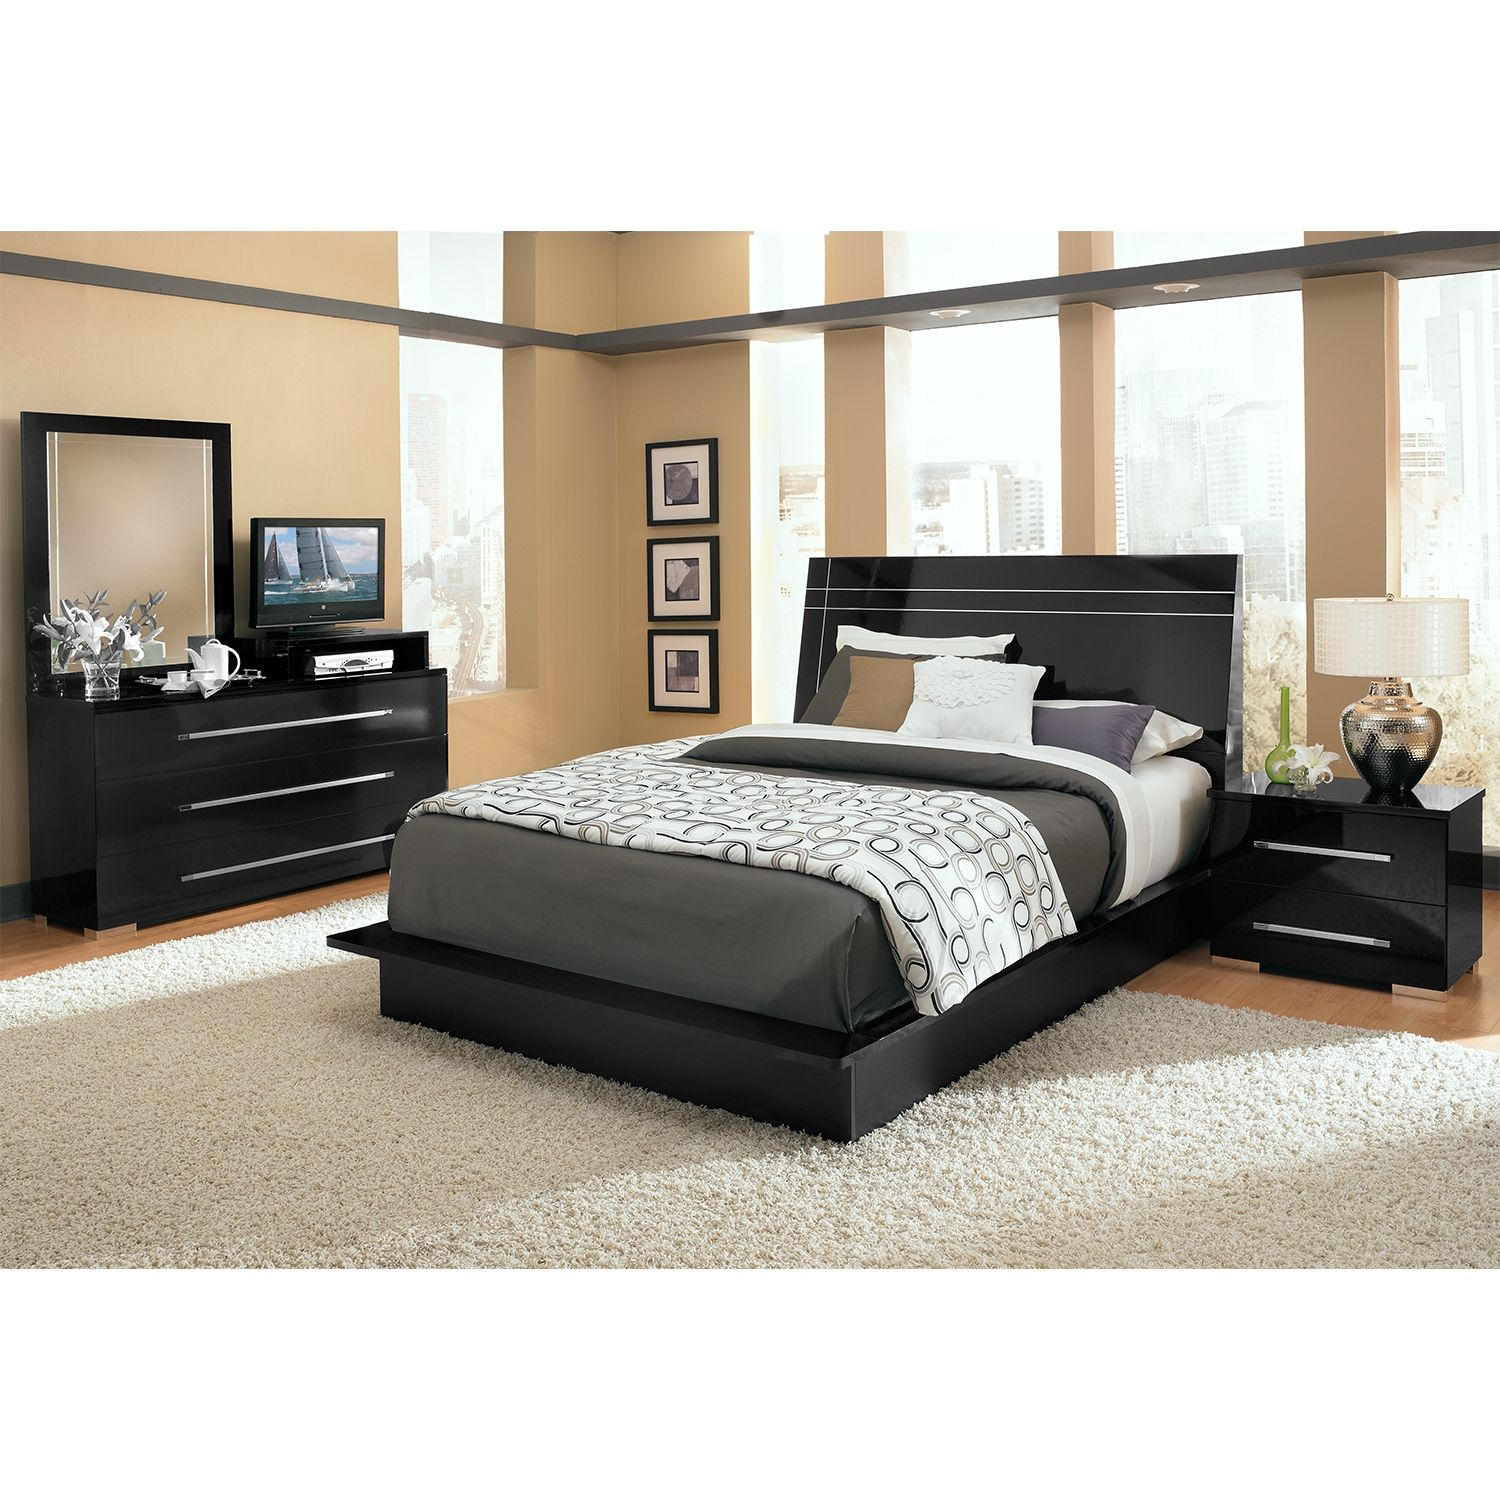 From Rome With Love The Dimora Black Bedroom Set Brings All The with measurements 1500 X 1500